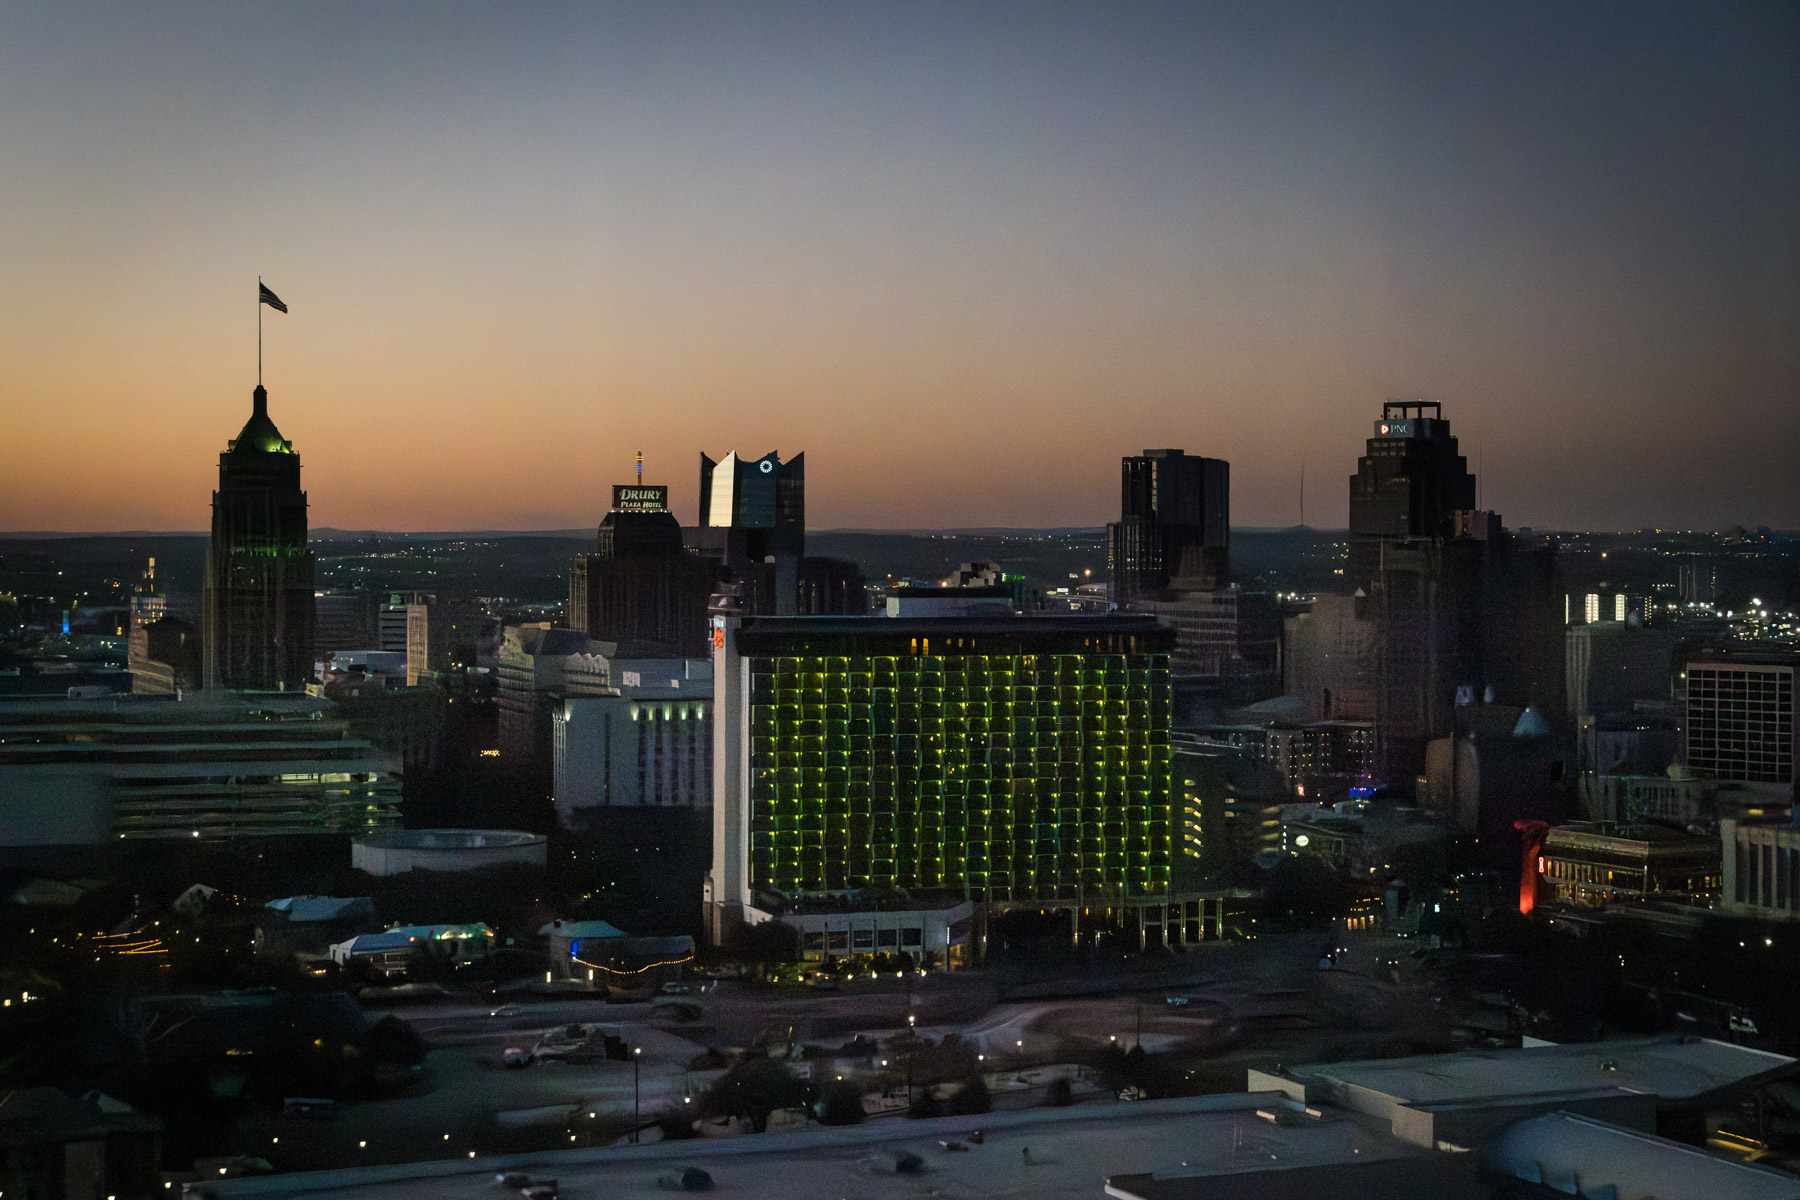 View of San Antonio skyline at dusk for an article on how to propose at the Tower of the Americas